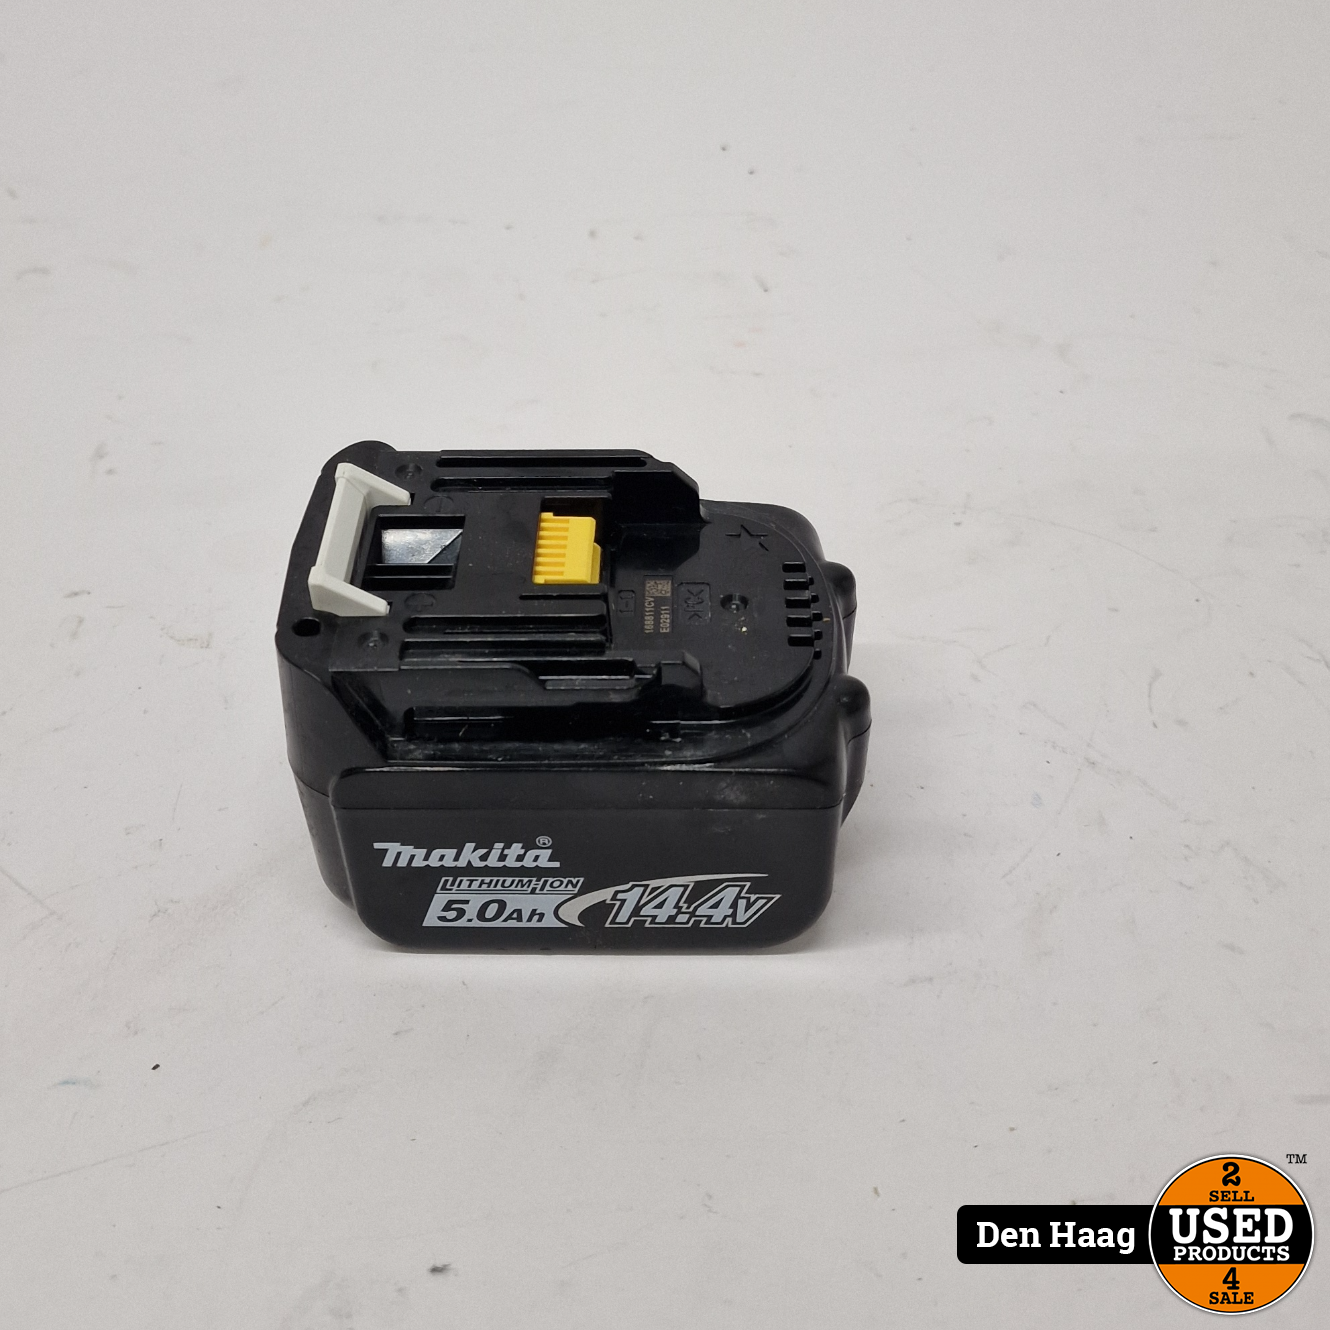 Makita 14.4V Accu 5.0ah Nette Used Products Den Haag